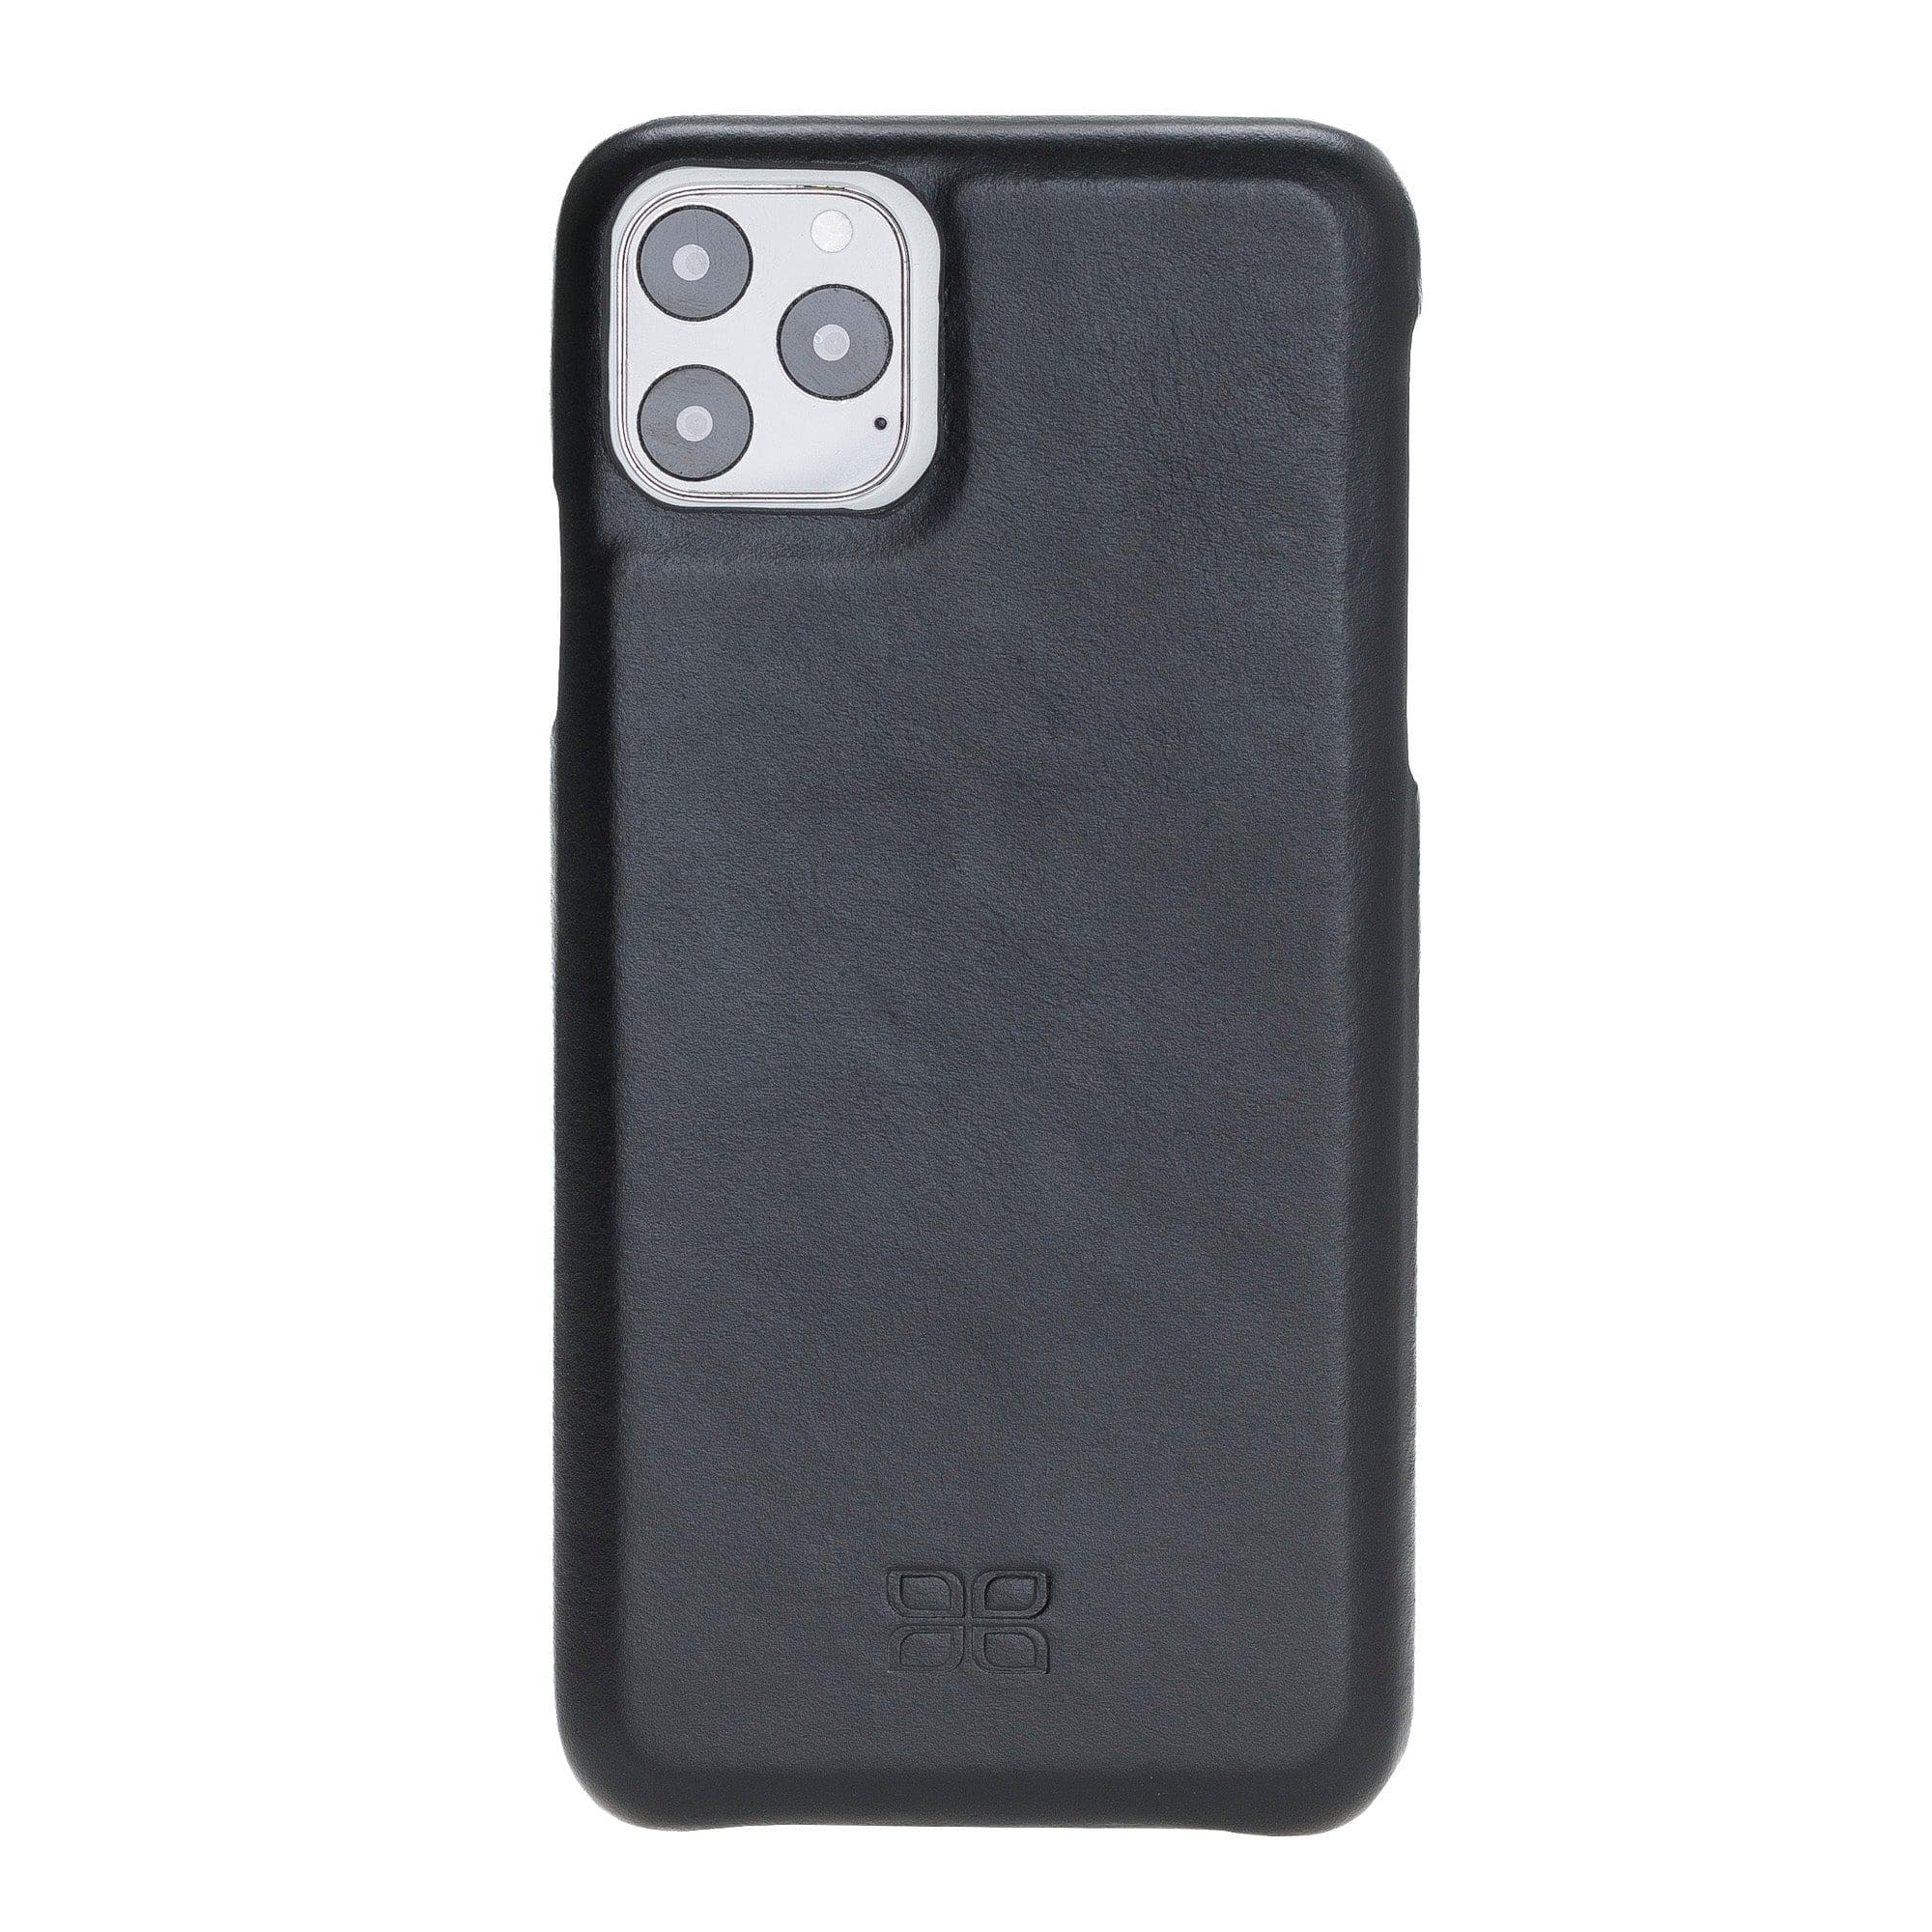 Bouletta Fully Leather Back Cover for Apple iPhone 11 Series İPhone 11 Pro Max / Black Bouletta LTD